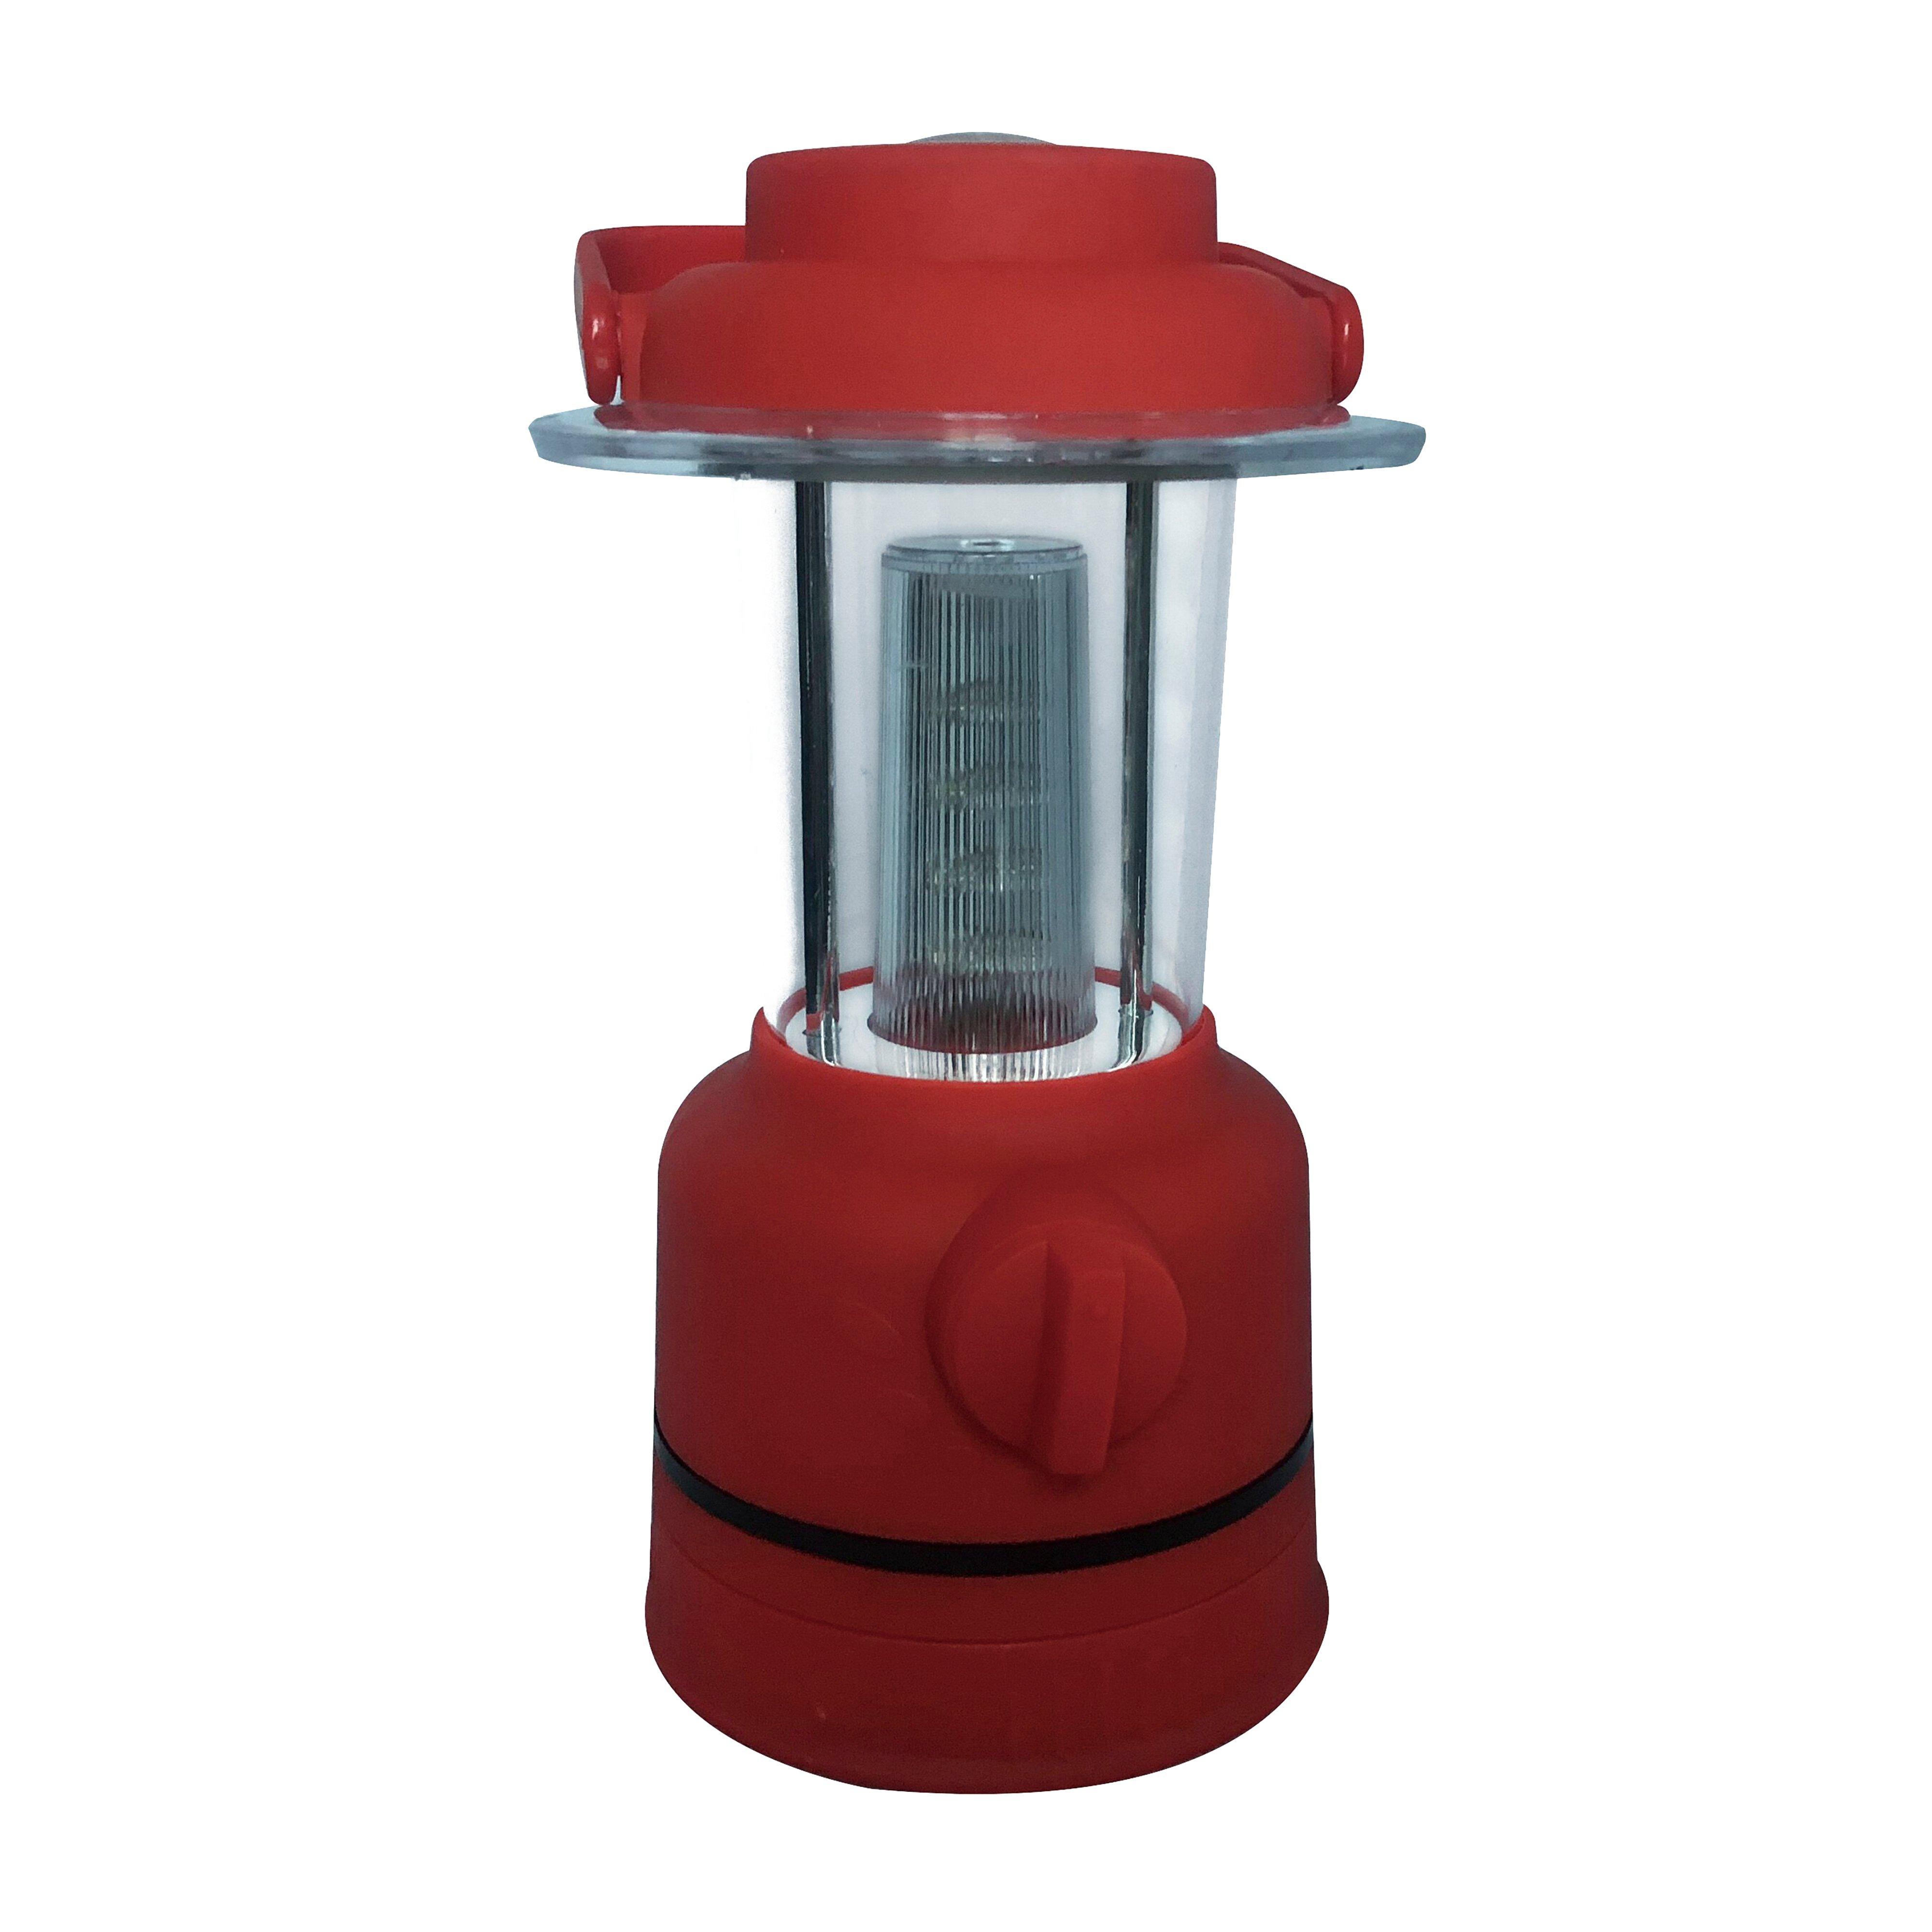 Handy Heroes 12 LED Compass Lantern Review